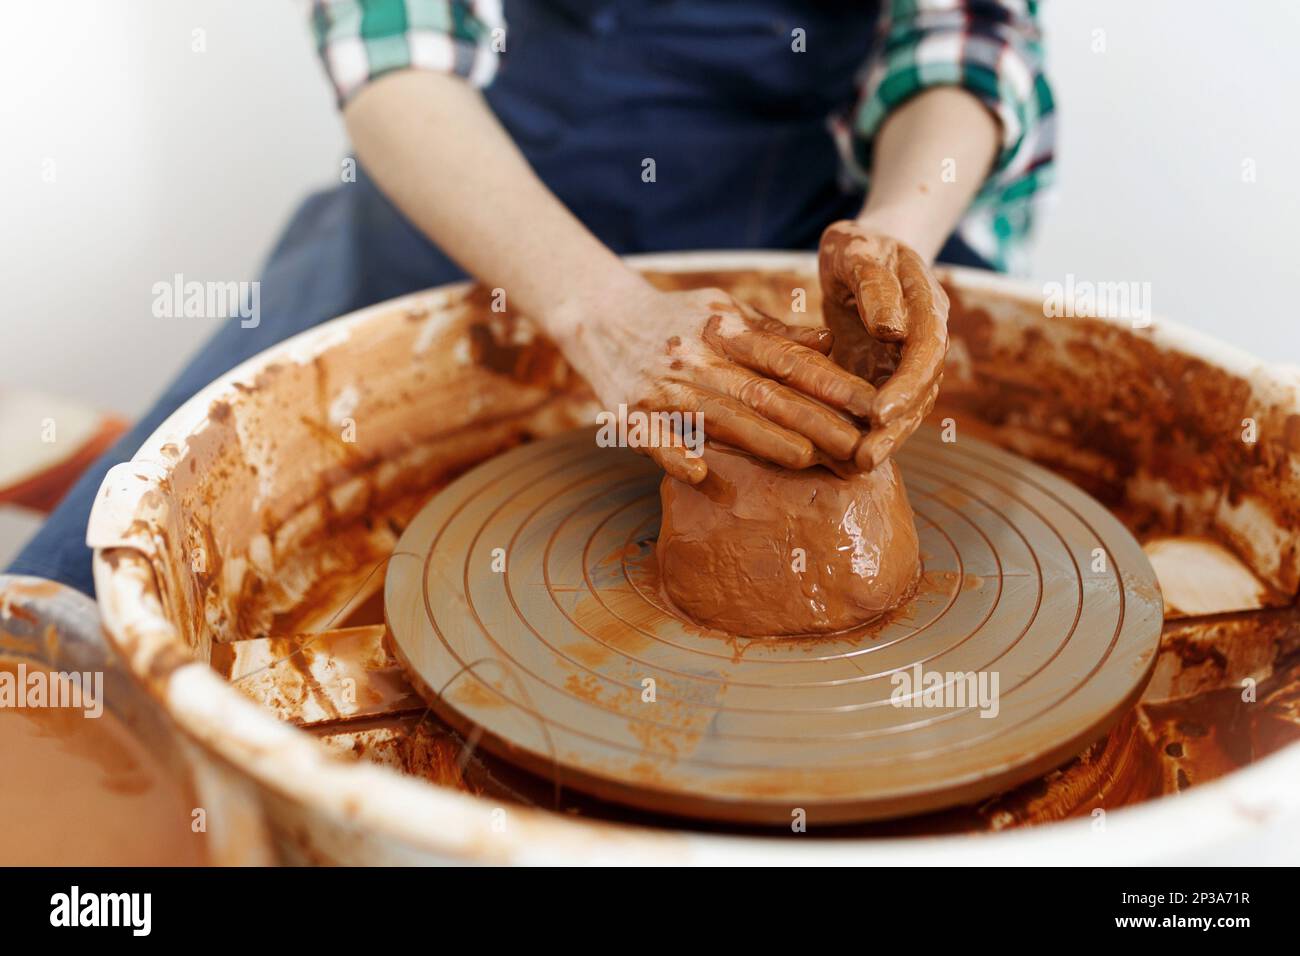 Cropped Image of Unrecognizable Female Ceramics Maker working with Pottery Wheel in Cozy Workshop Makes a Future Vase or Mug, Creative People Stock Photo